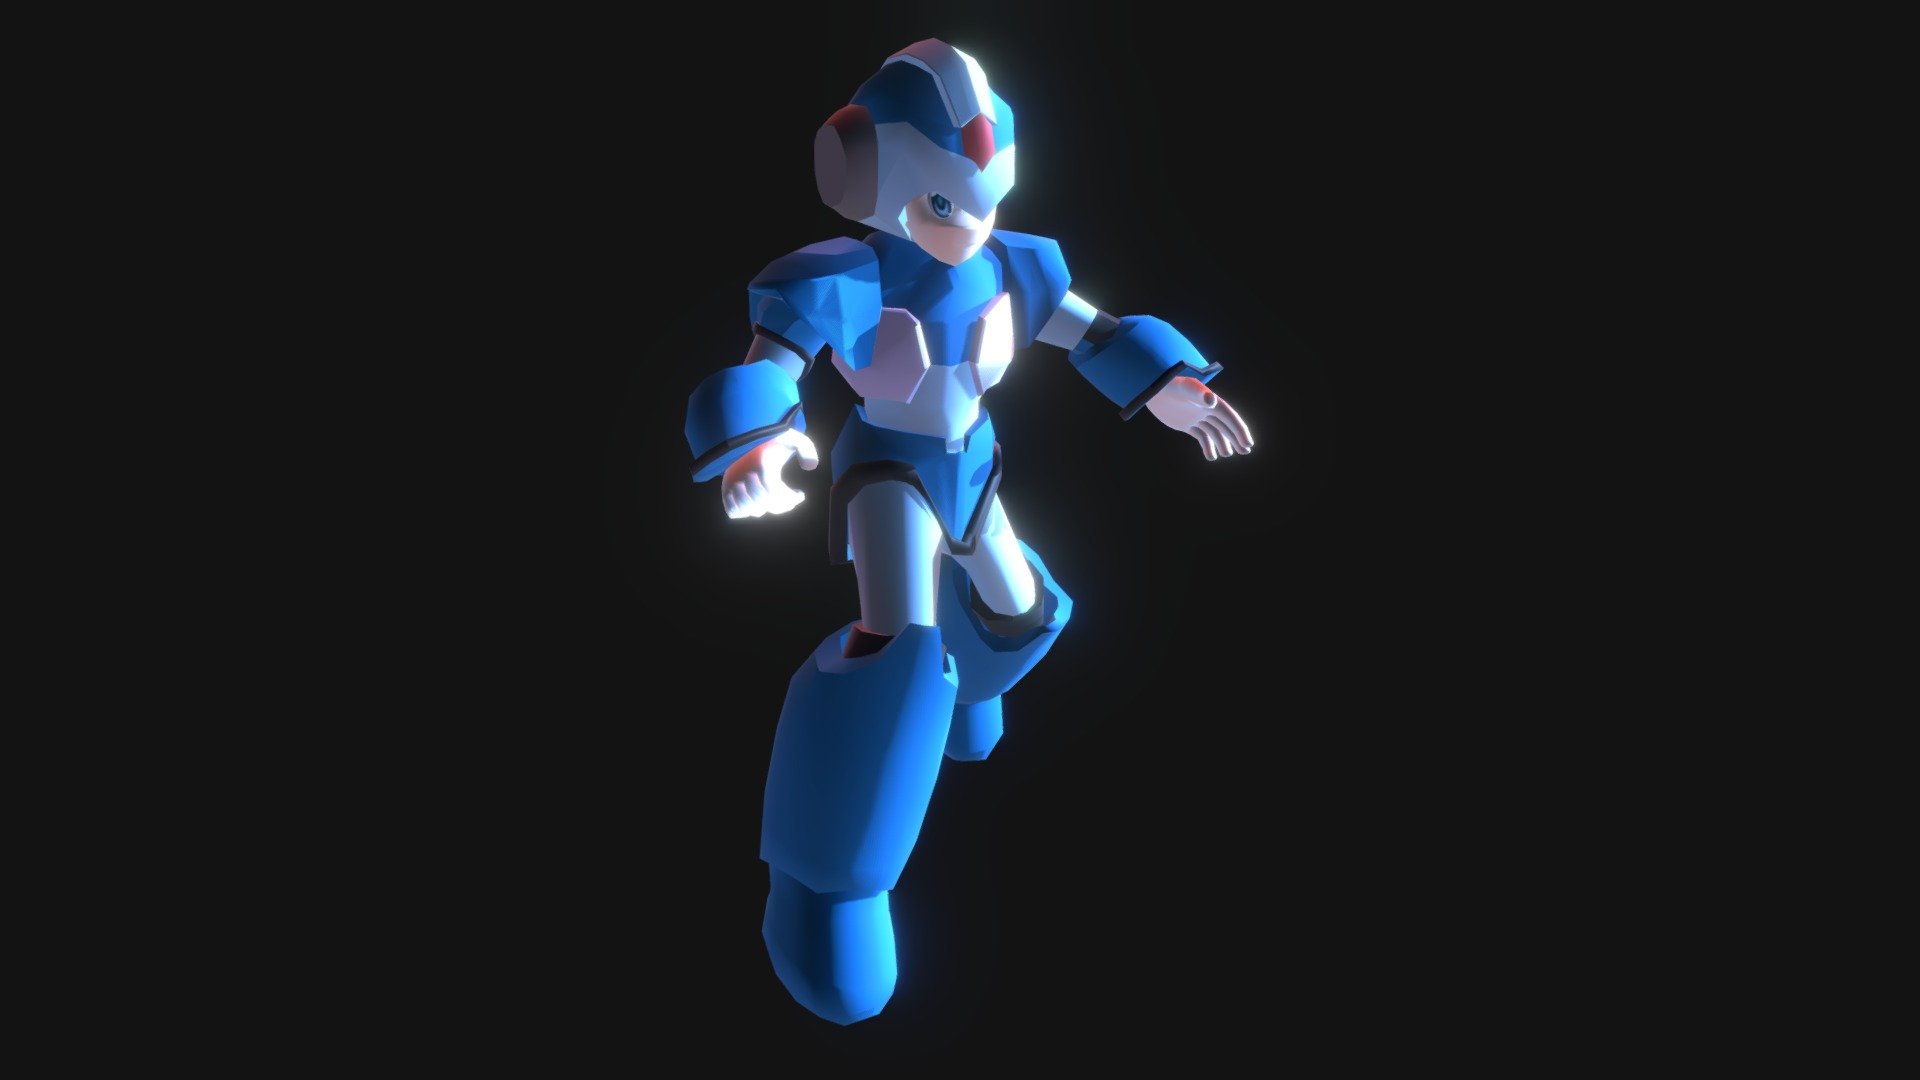 Low-poly Megaman.

Modeled in Maya 2019 with A pose, rigged and textured.

Available Format: OBJ, FBX, Maya 2019.

PLEASE NOTICE: I'm not a rigger so the the model was not rigged properly. Making simple poses are OK, but it need extra work to be animated. Please don't judge my rigging (&gt;.&lt;)

Thank you so much for your interest!











 - Megaman - Buy Royalty Free 3D model by tran.ha.anh.thu.99 3d model